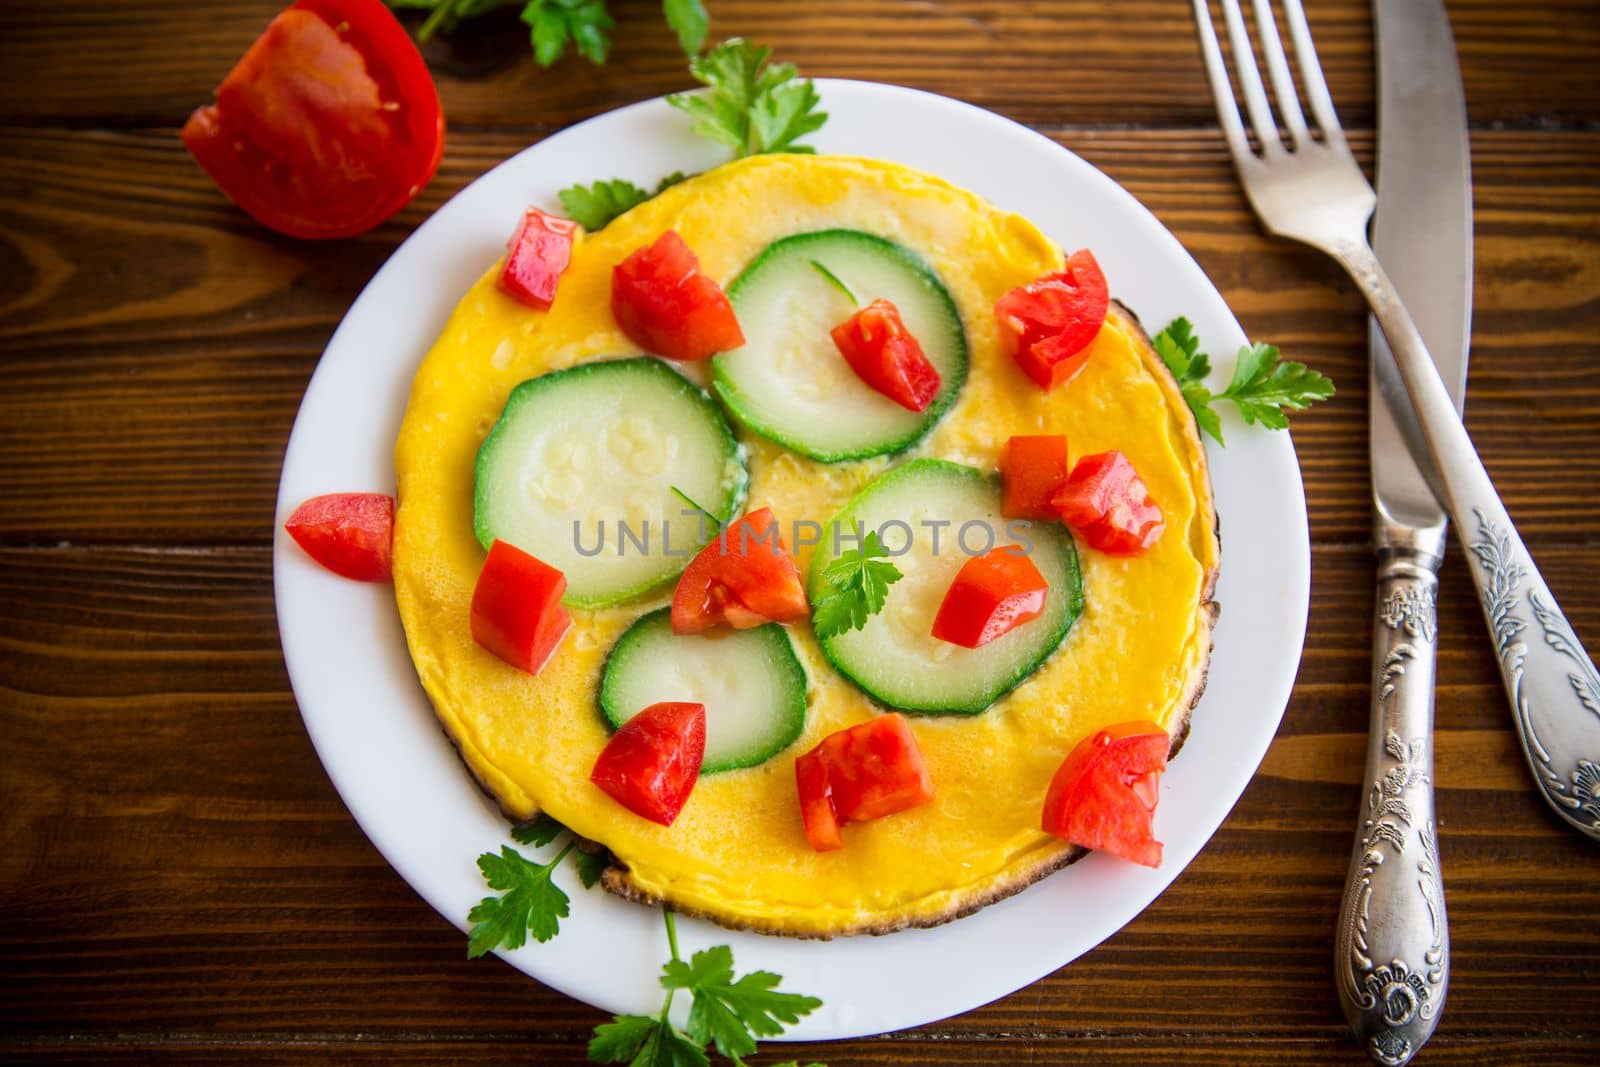 Fried omelet with zucchini, tomatoes, herbs in a plate by Rawlik